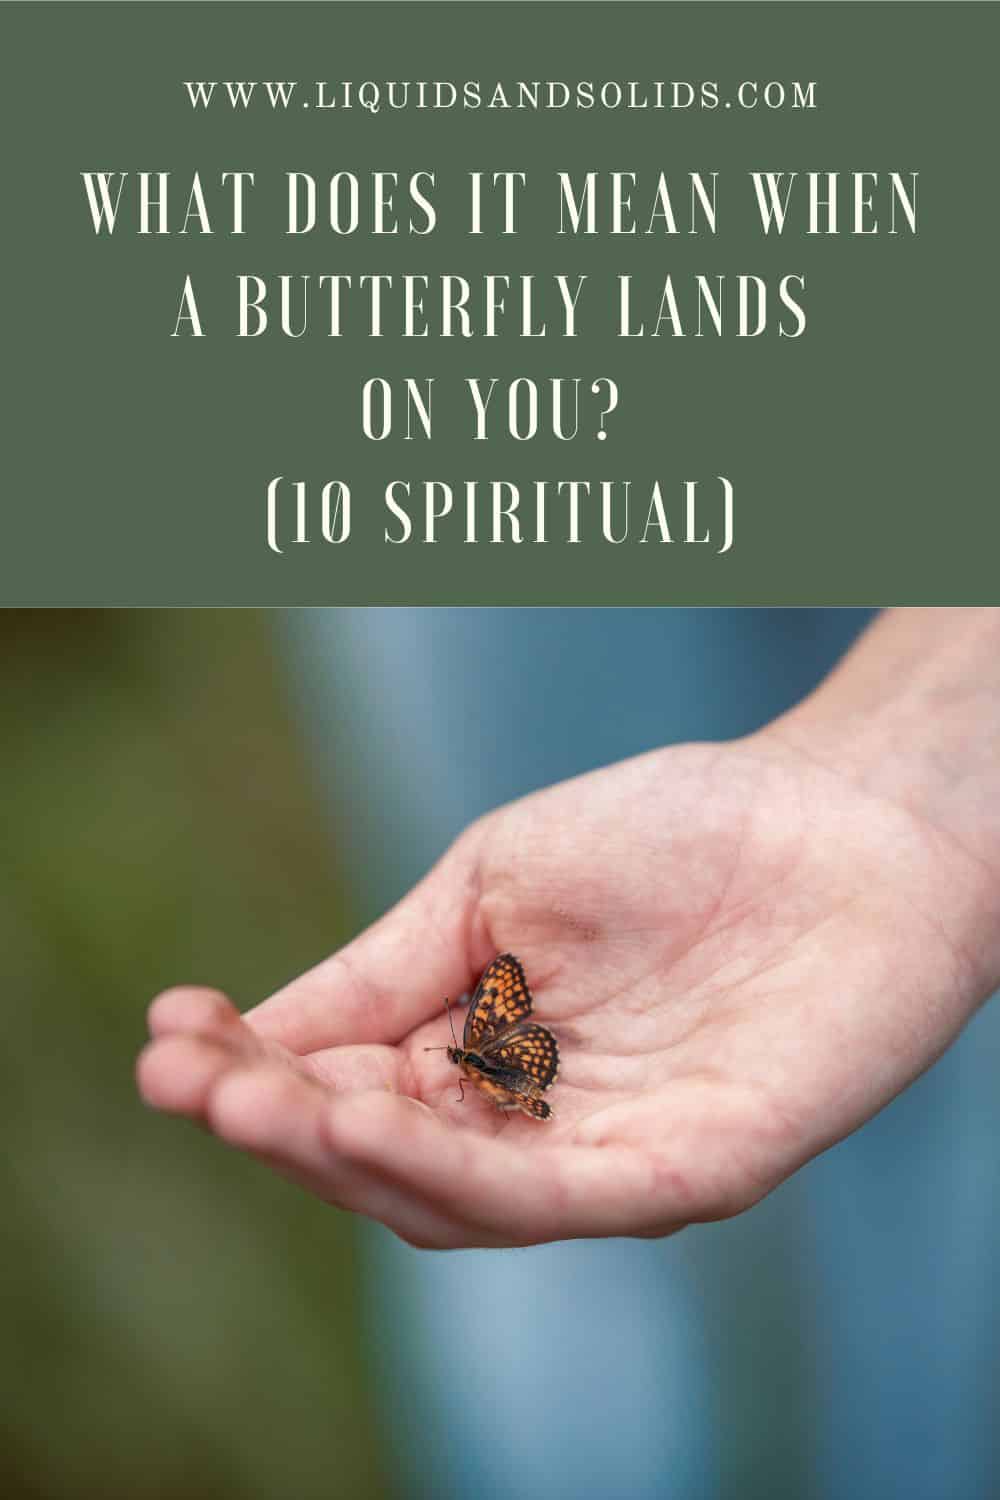 What does it mean when a butterfly lands on you?